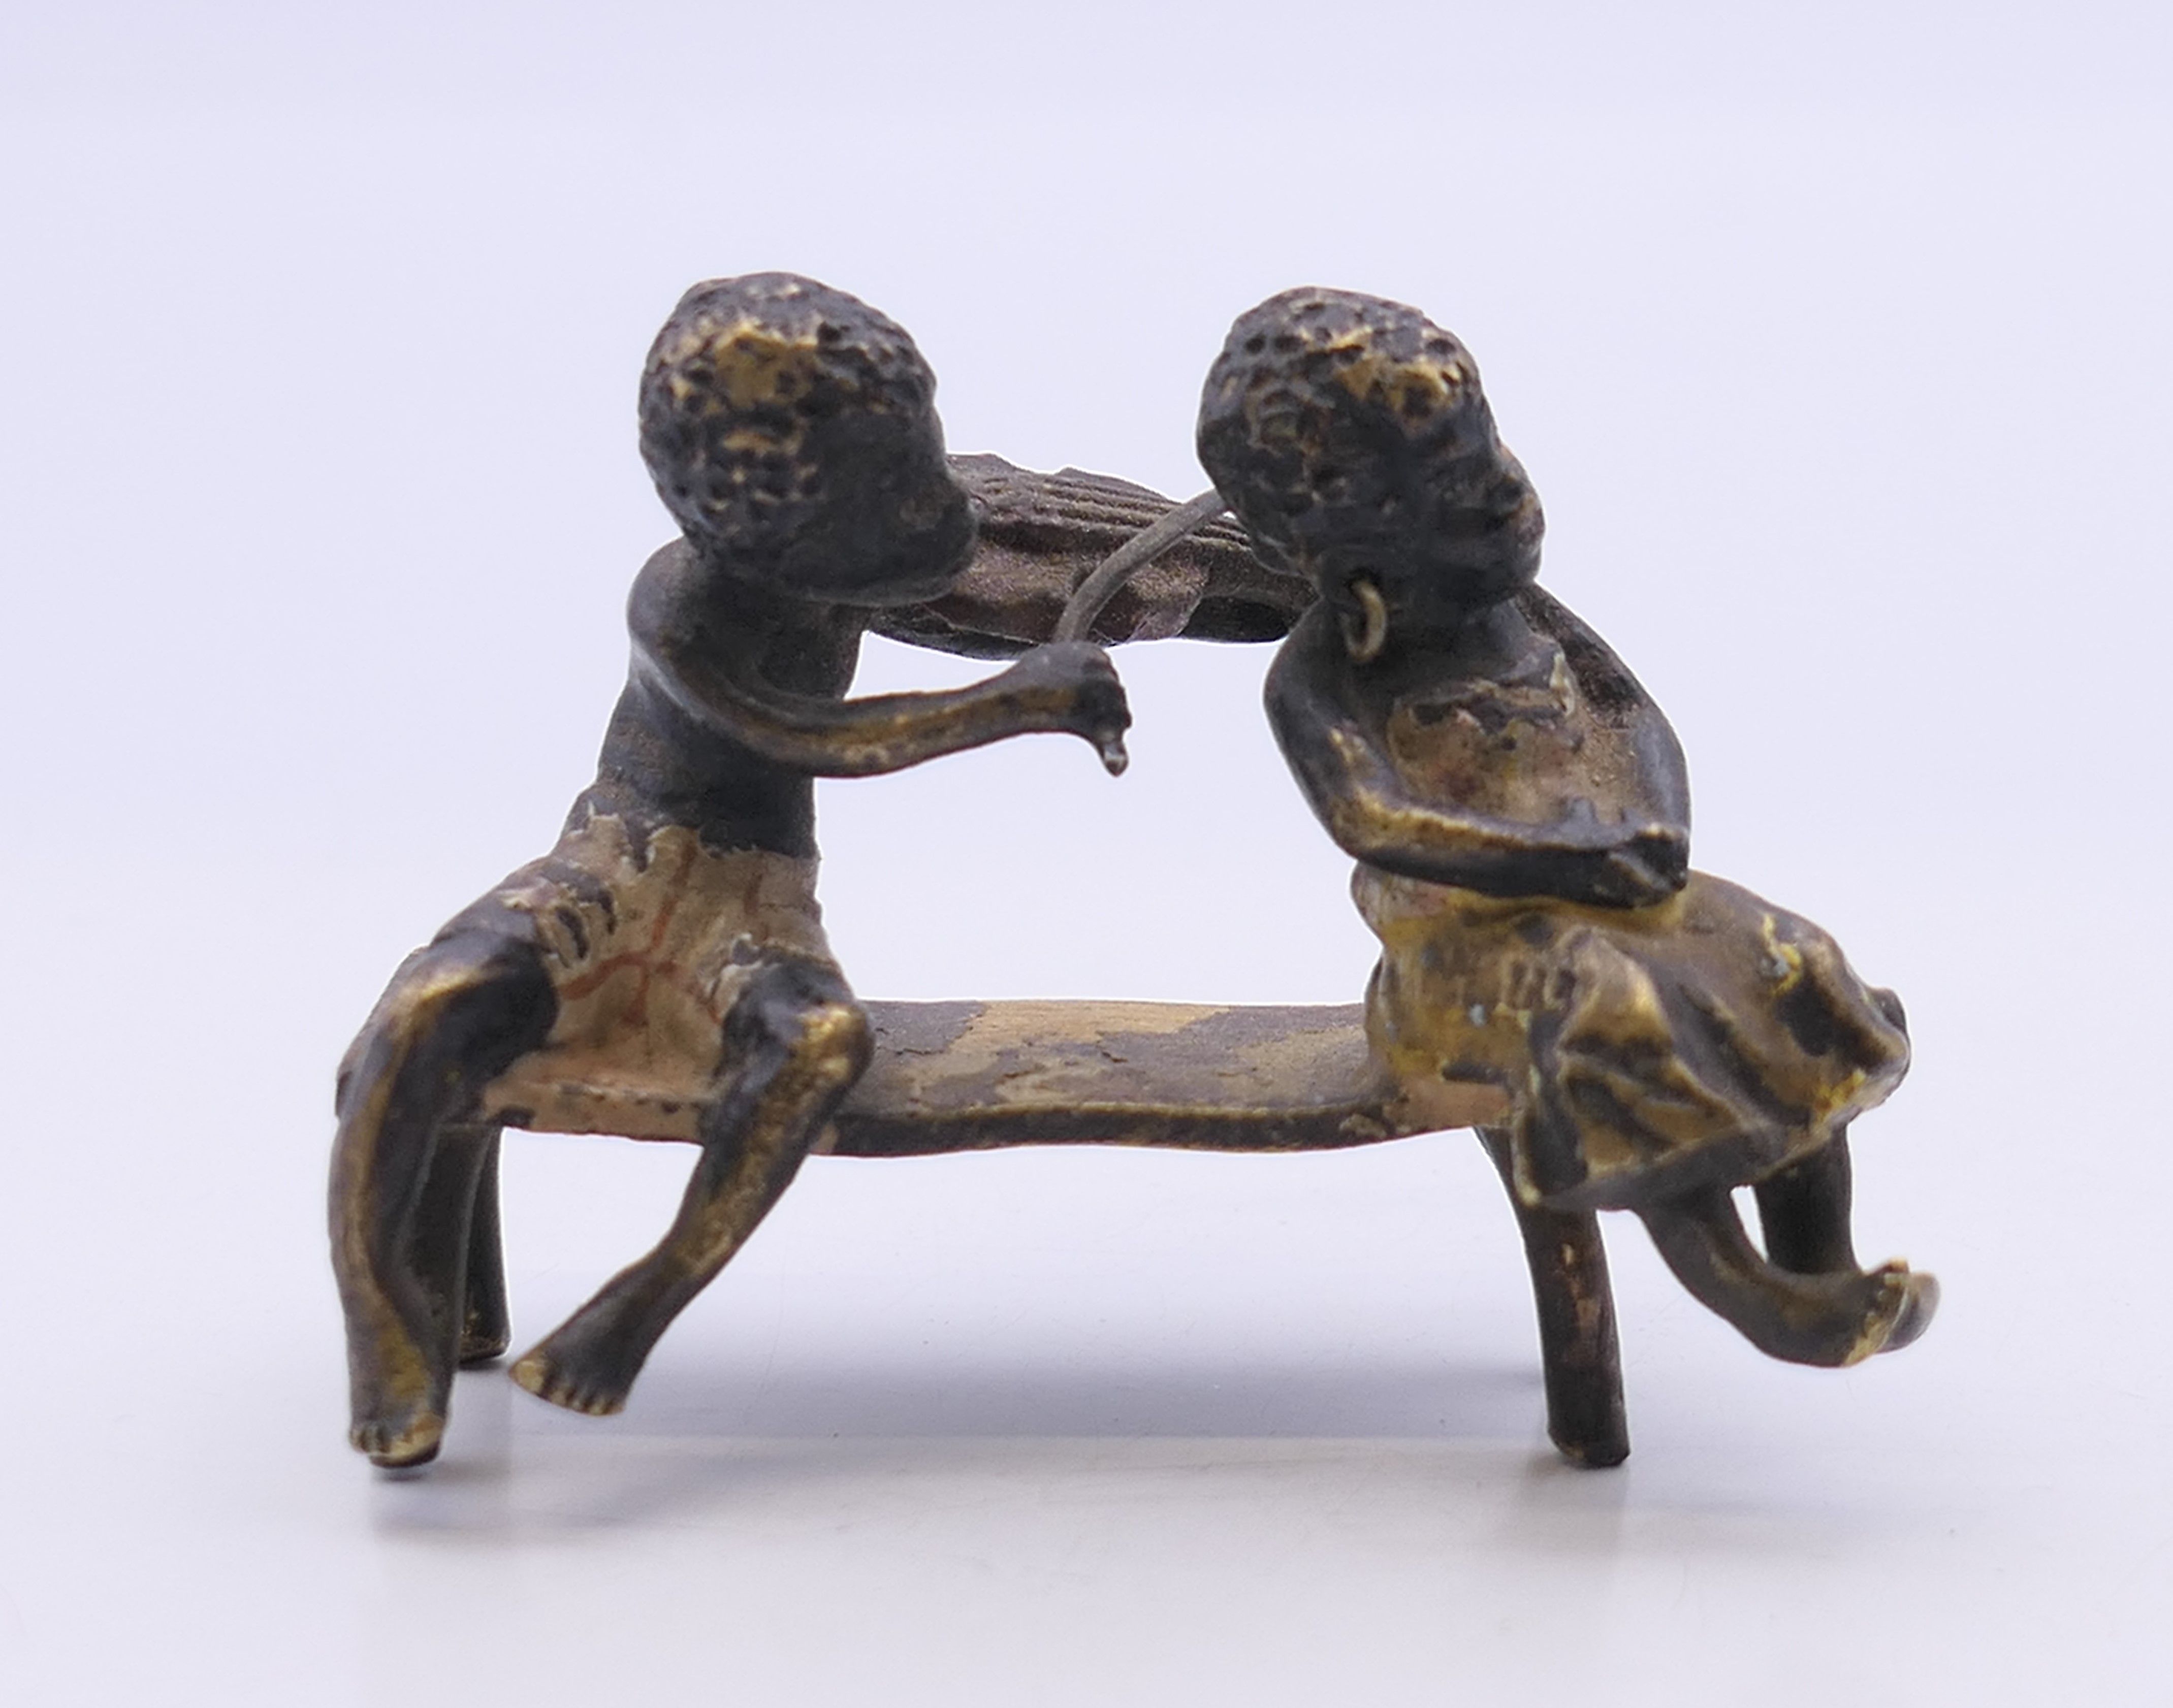 A 19th century Austrian cold painted bronze model formed as two figures seated on a bench, - Image 2 of 4